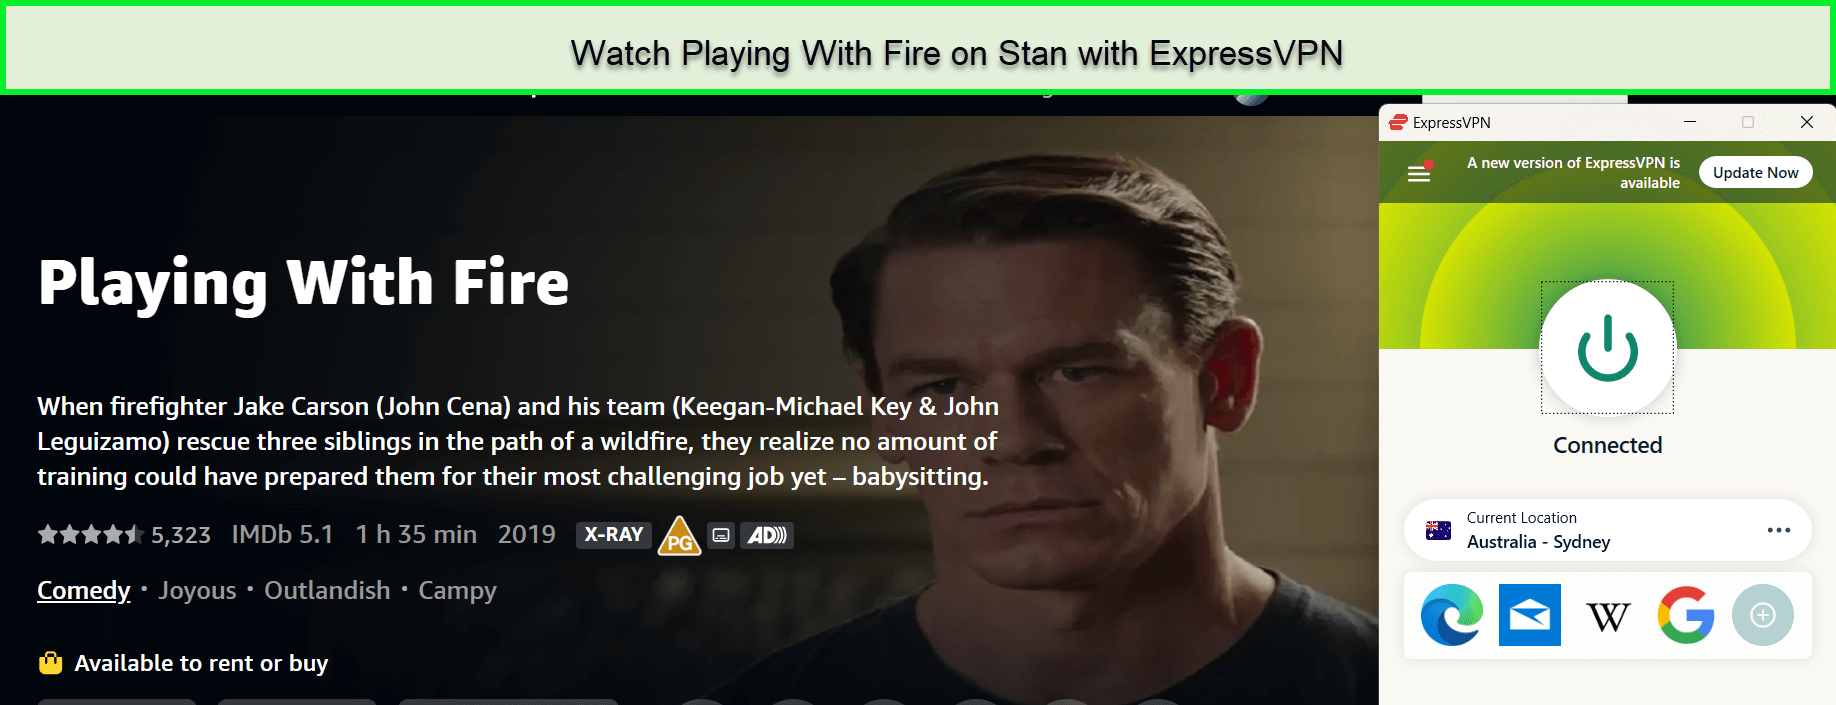 Watch Playing With Fire in-UK on Stan 